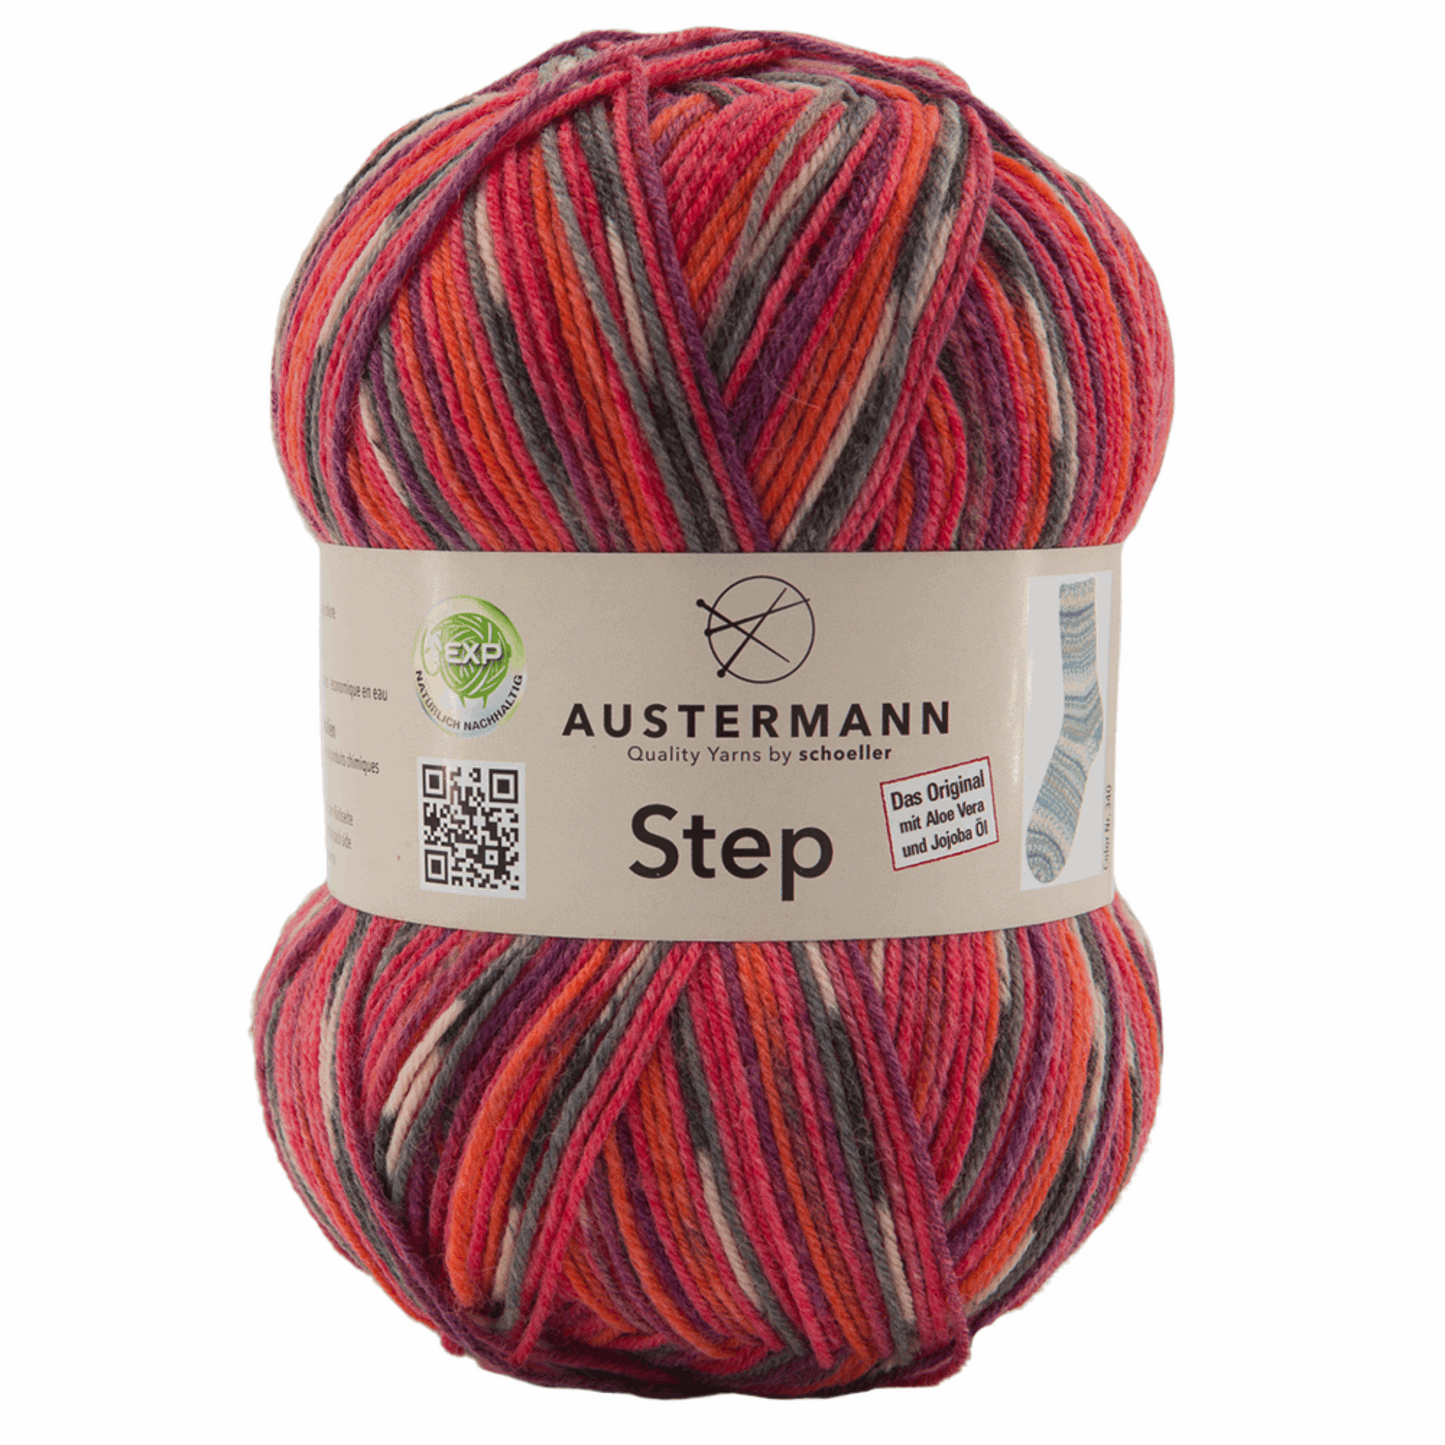 Austermann Step 4F Color 100g, 97689, Farbe rot-pflaume 256